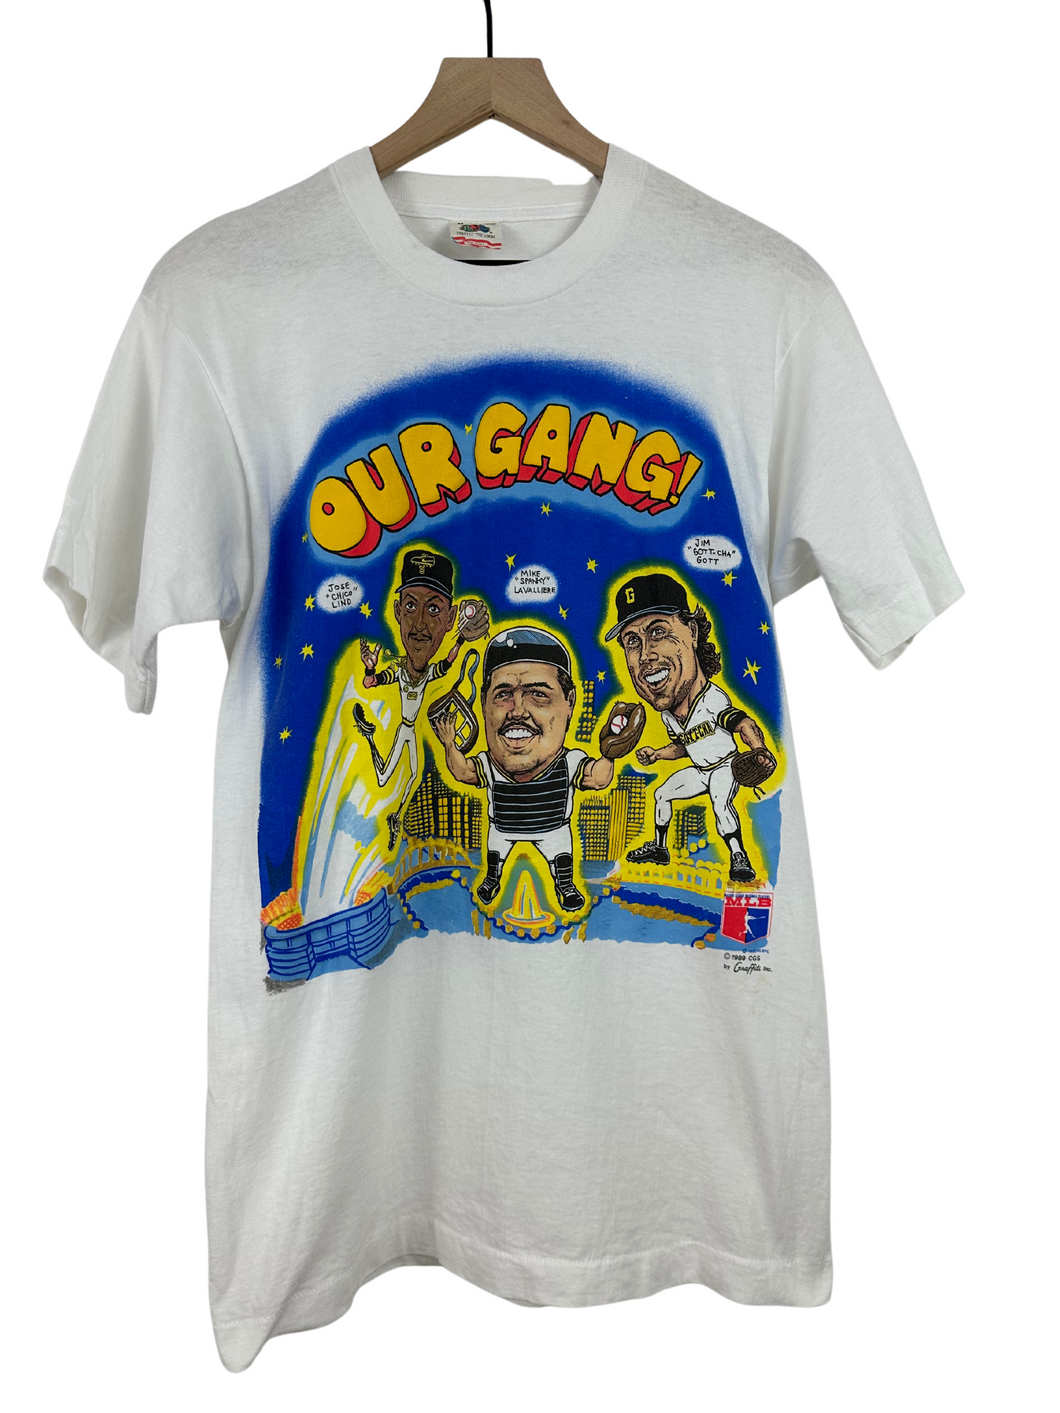 1989 Vintage Pittsburgh Pirates 'Our Gang' T-Shirt